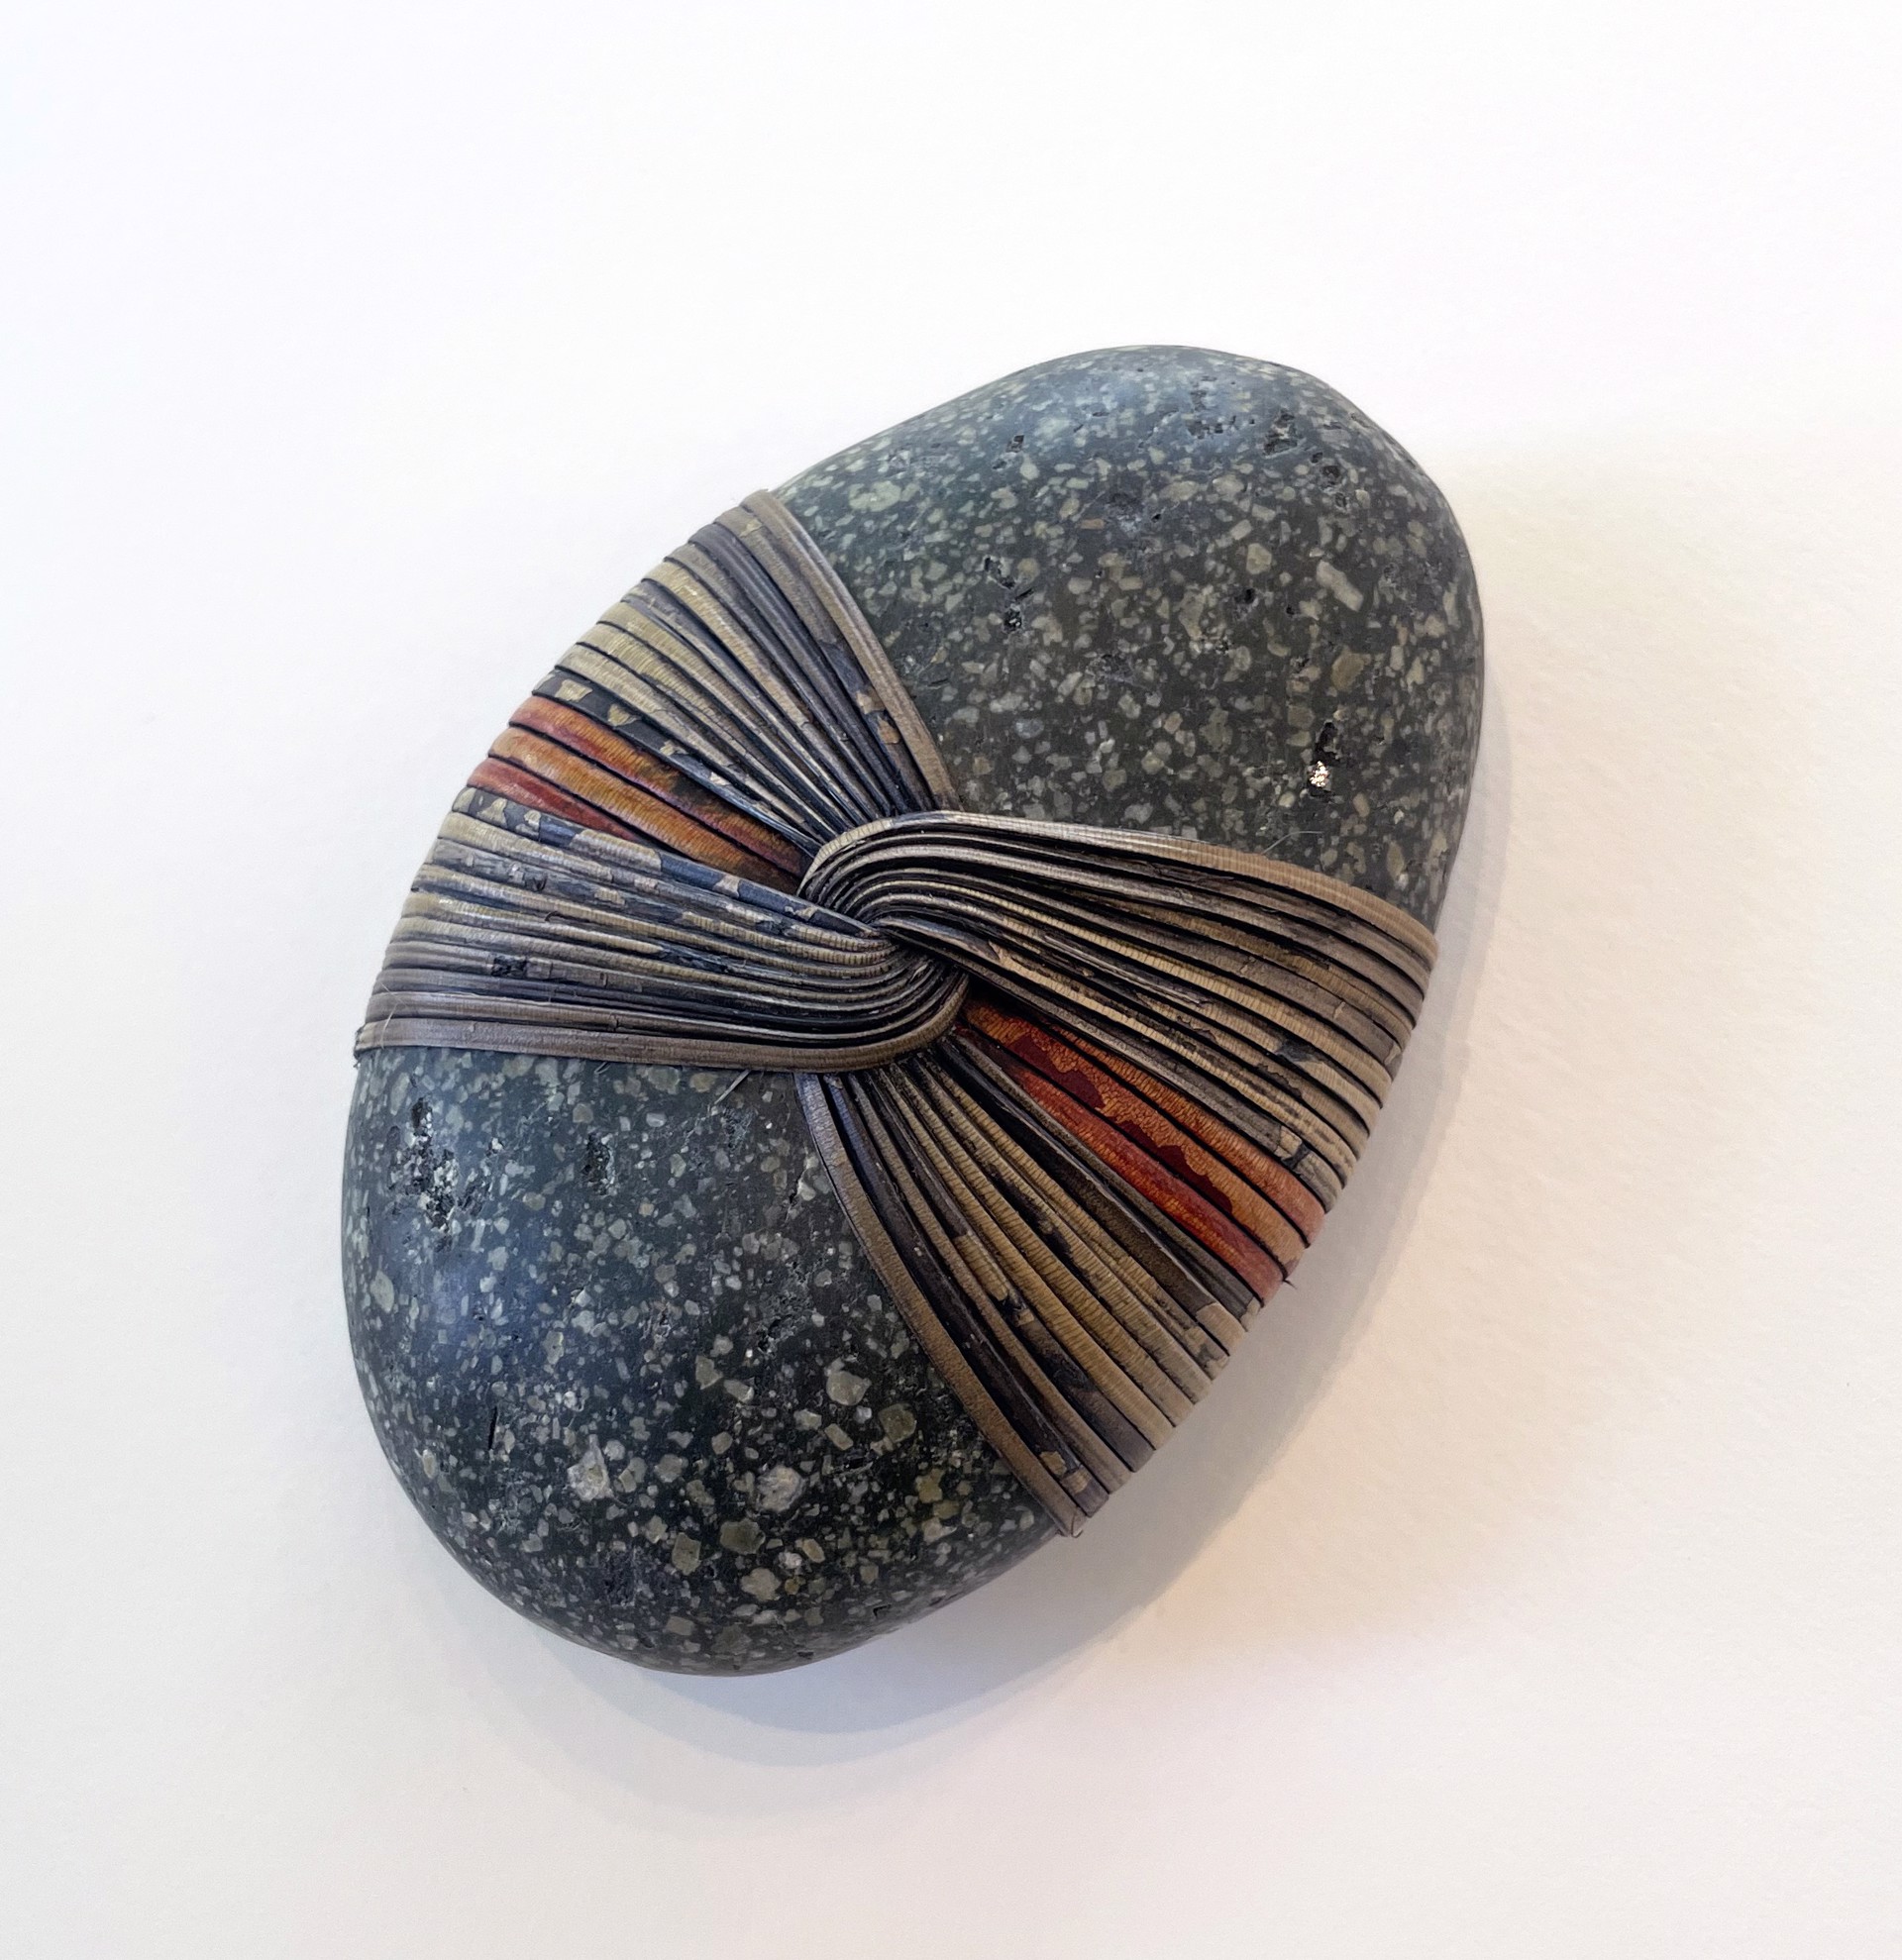 Small Blessing Stone by Deloss Webber